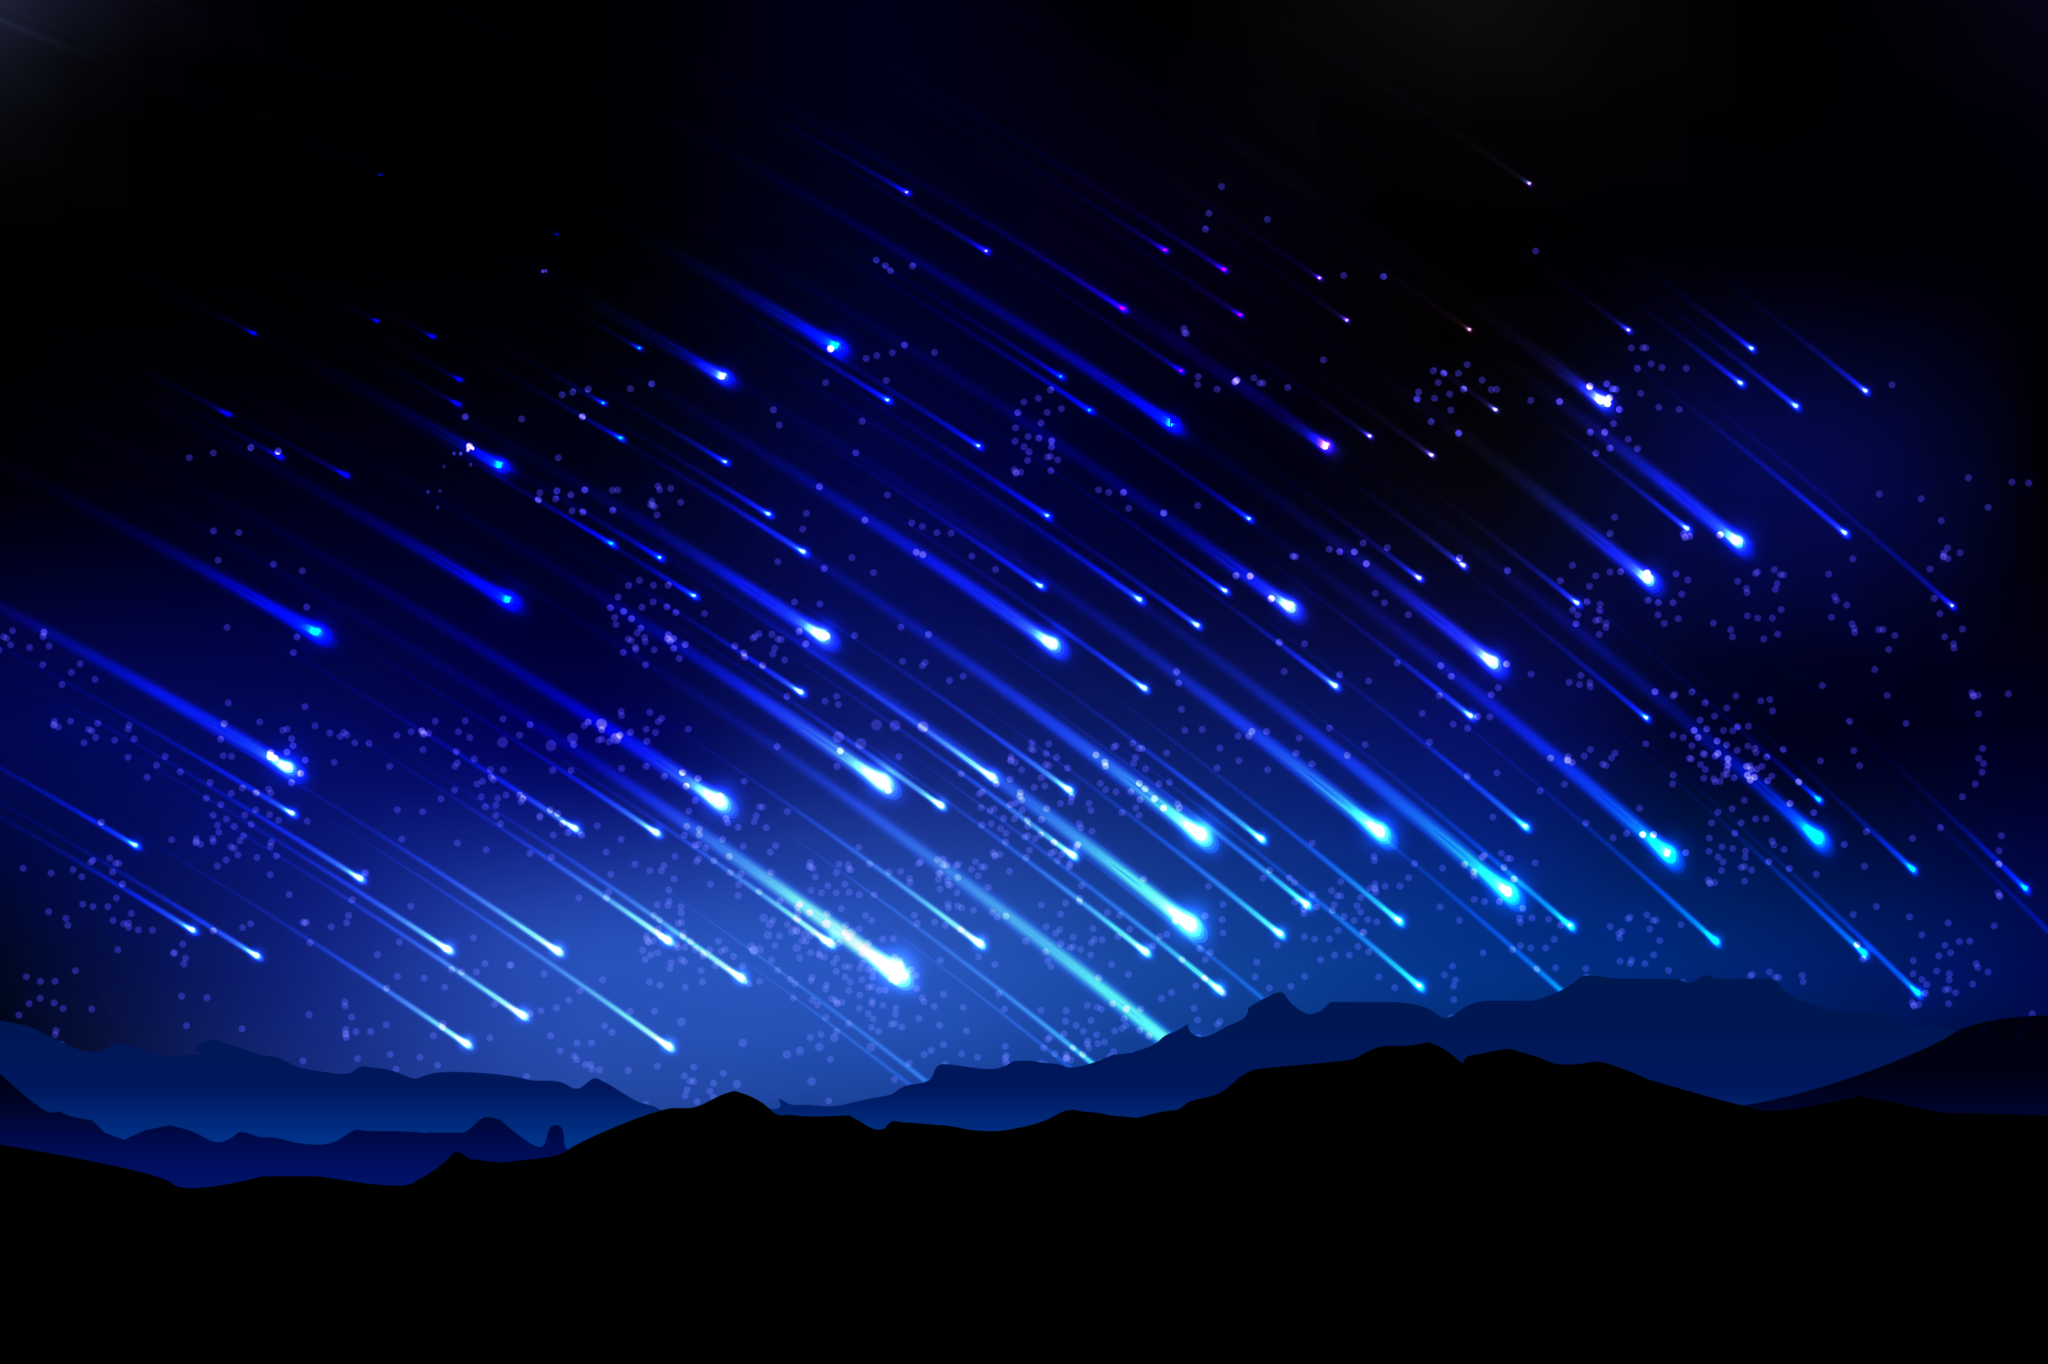 July Brings Two Meteor Showers Shooting Stars Will Light Up The Sky